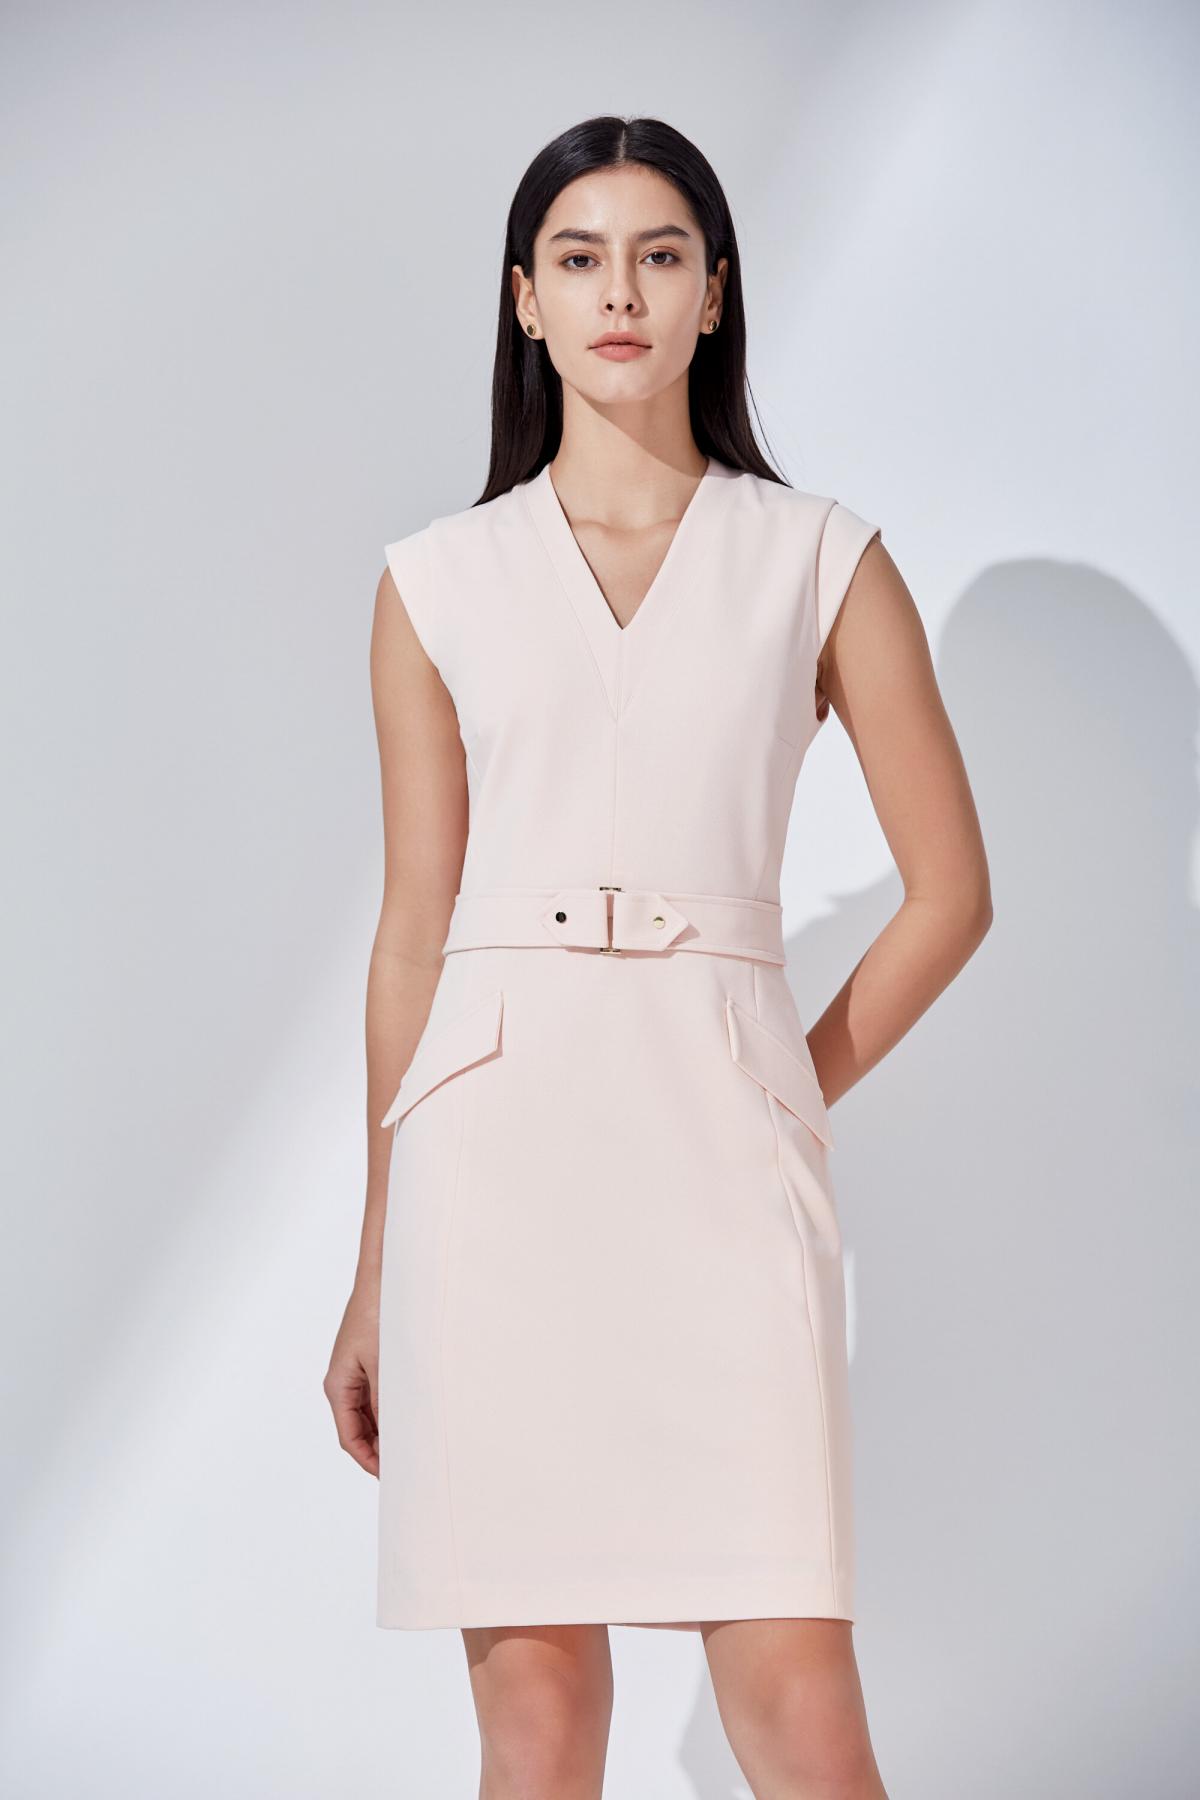 G2000 | Women's Crepe Knit Fitted Dress (Peach) | Size : 32 | HKTVmall The  Largest HK Shopping Platform